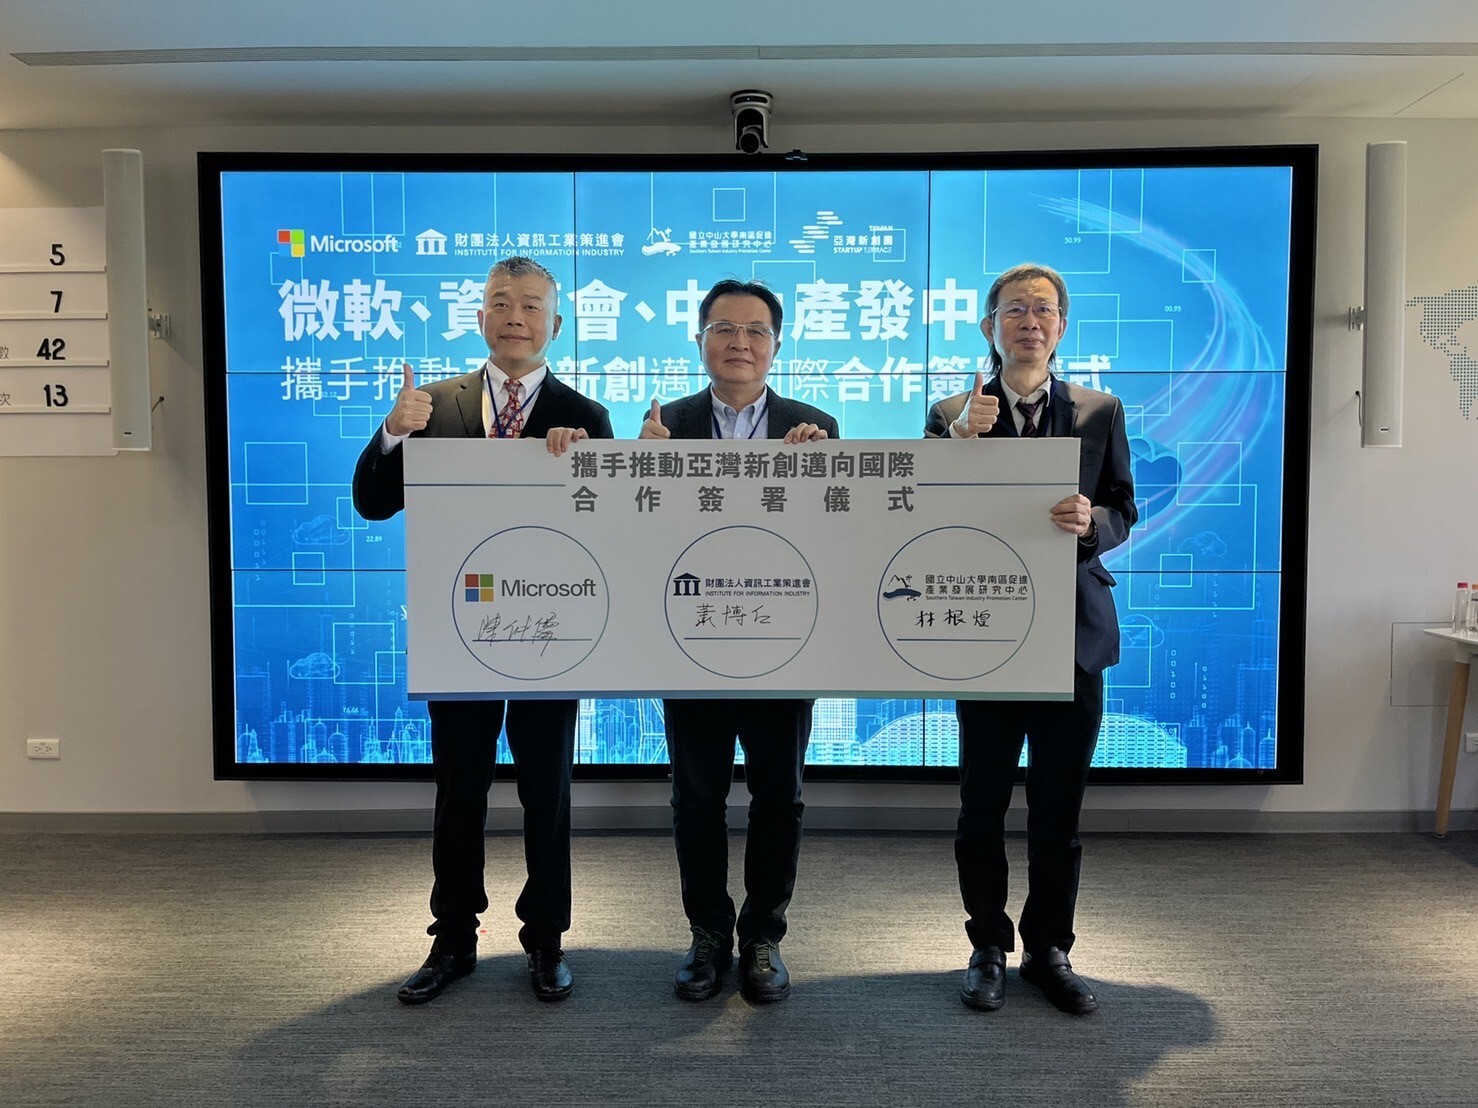 The collaboration agreement was signed by the Director of Southern Taiwan Industry Promotion Center Ken-Huang Lin (right), Executive Vice President of Institute for Information Industry Po-Jen Hsiao (center), and Global Partner Solution General Manager of Microsoft Taiwan Jerry Chen (left).